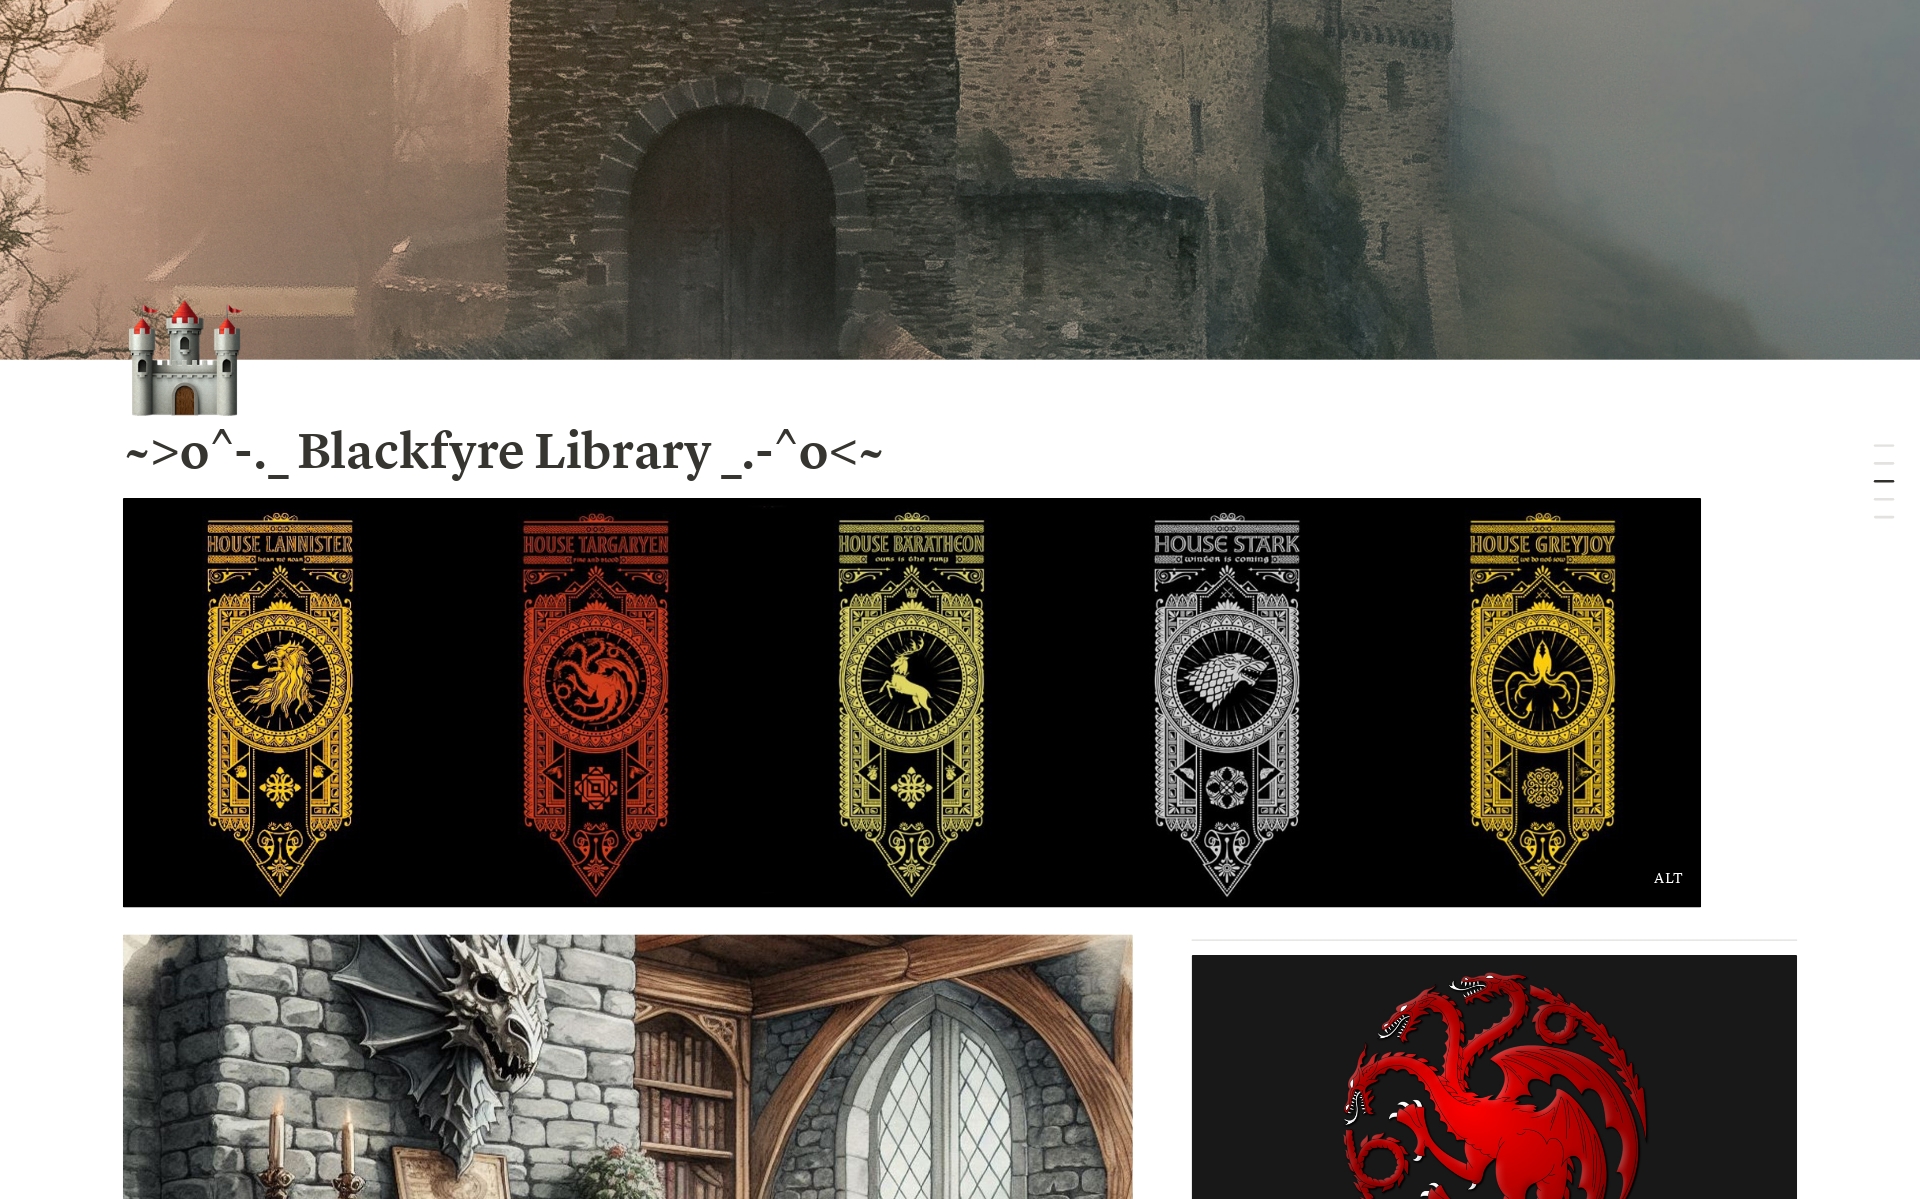 A template featuring creative commons media related to House of the Dragon and Game of Thrones. There are free to use wallpapers, emojis, ascii art, and more.